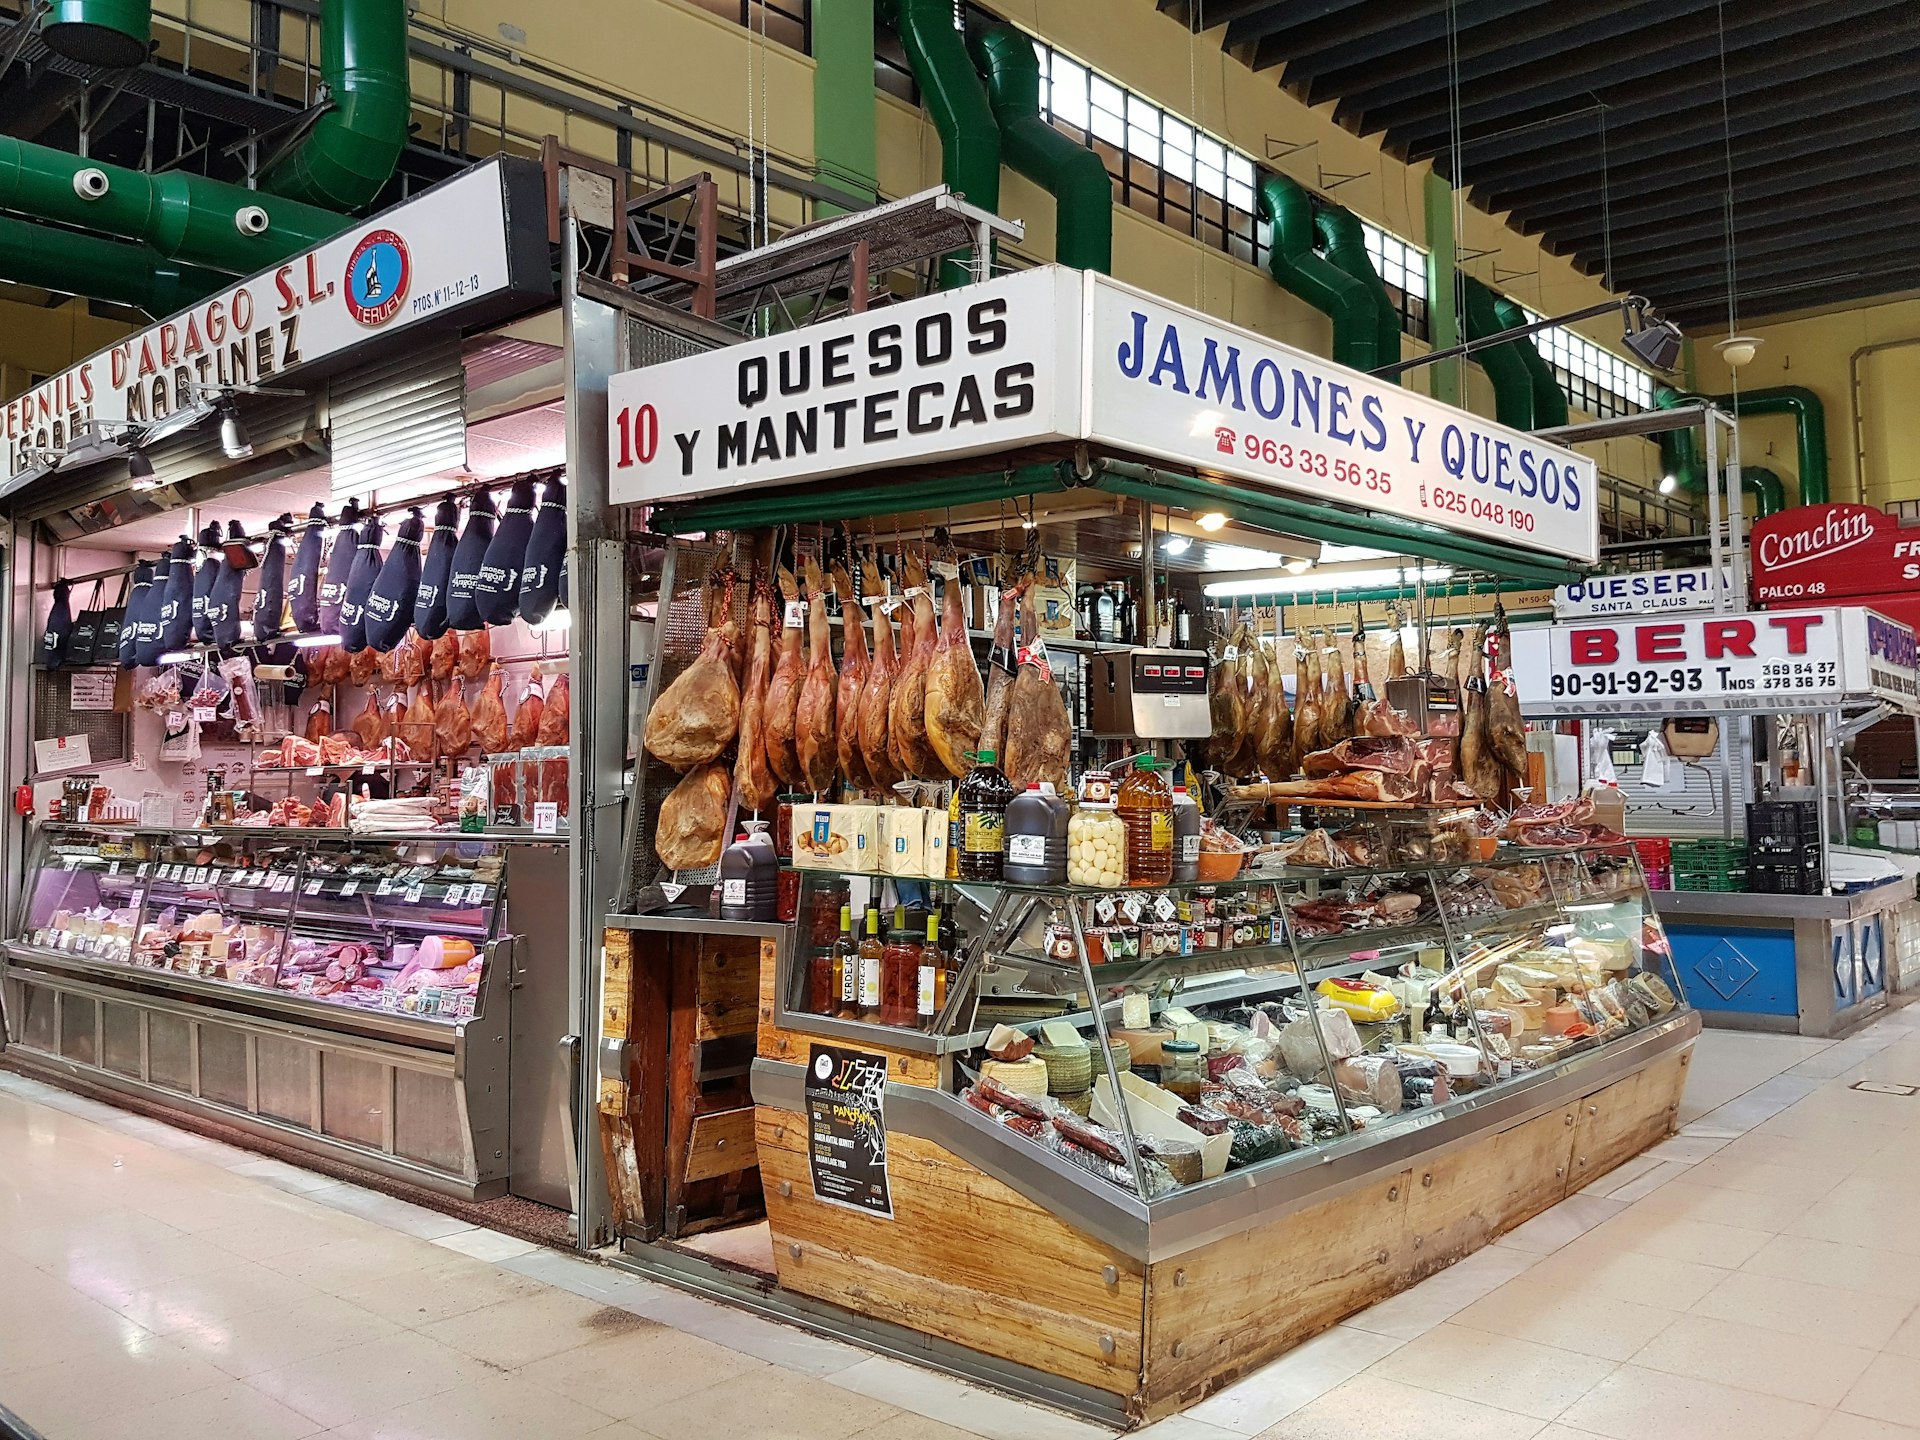 Stalls inside a brightly lit covered market. The closest stall has many cured hams hanging up on display, as well as an array of different cheeses in a glass cabinet.